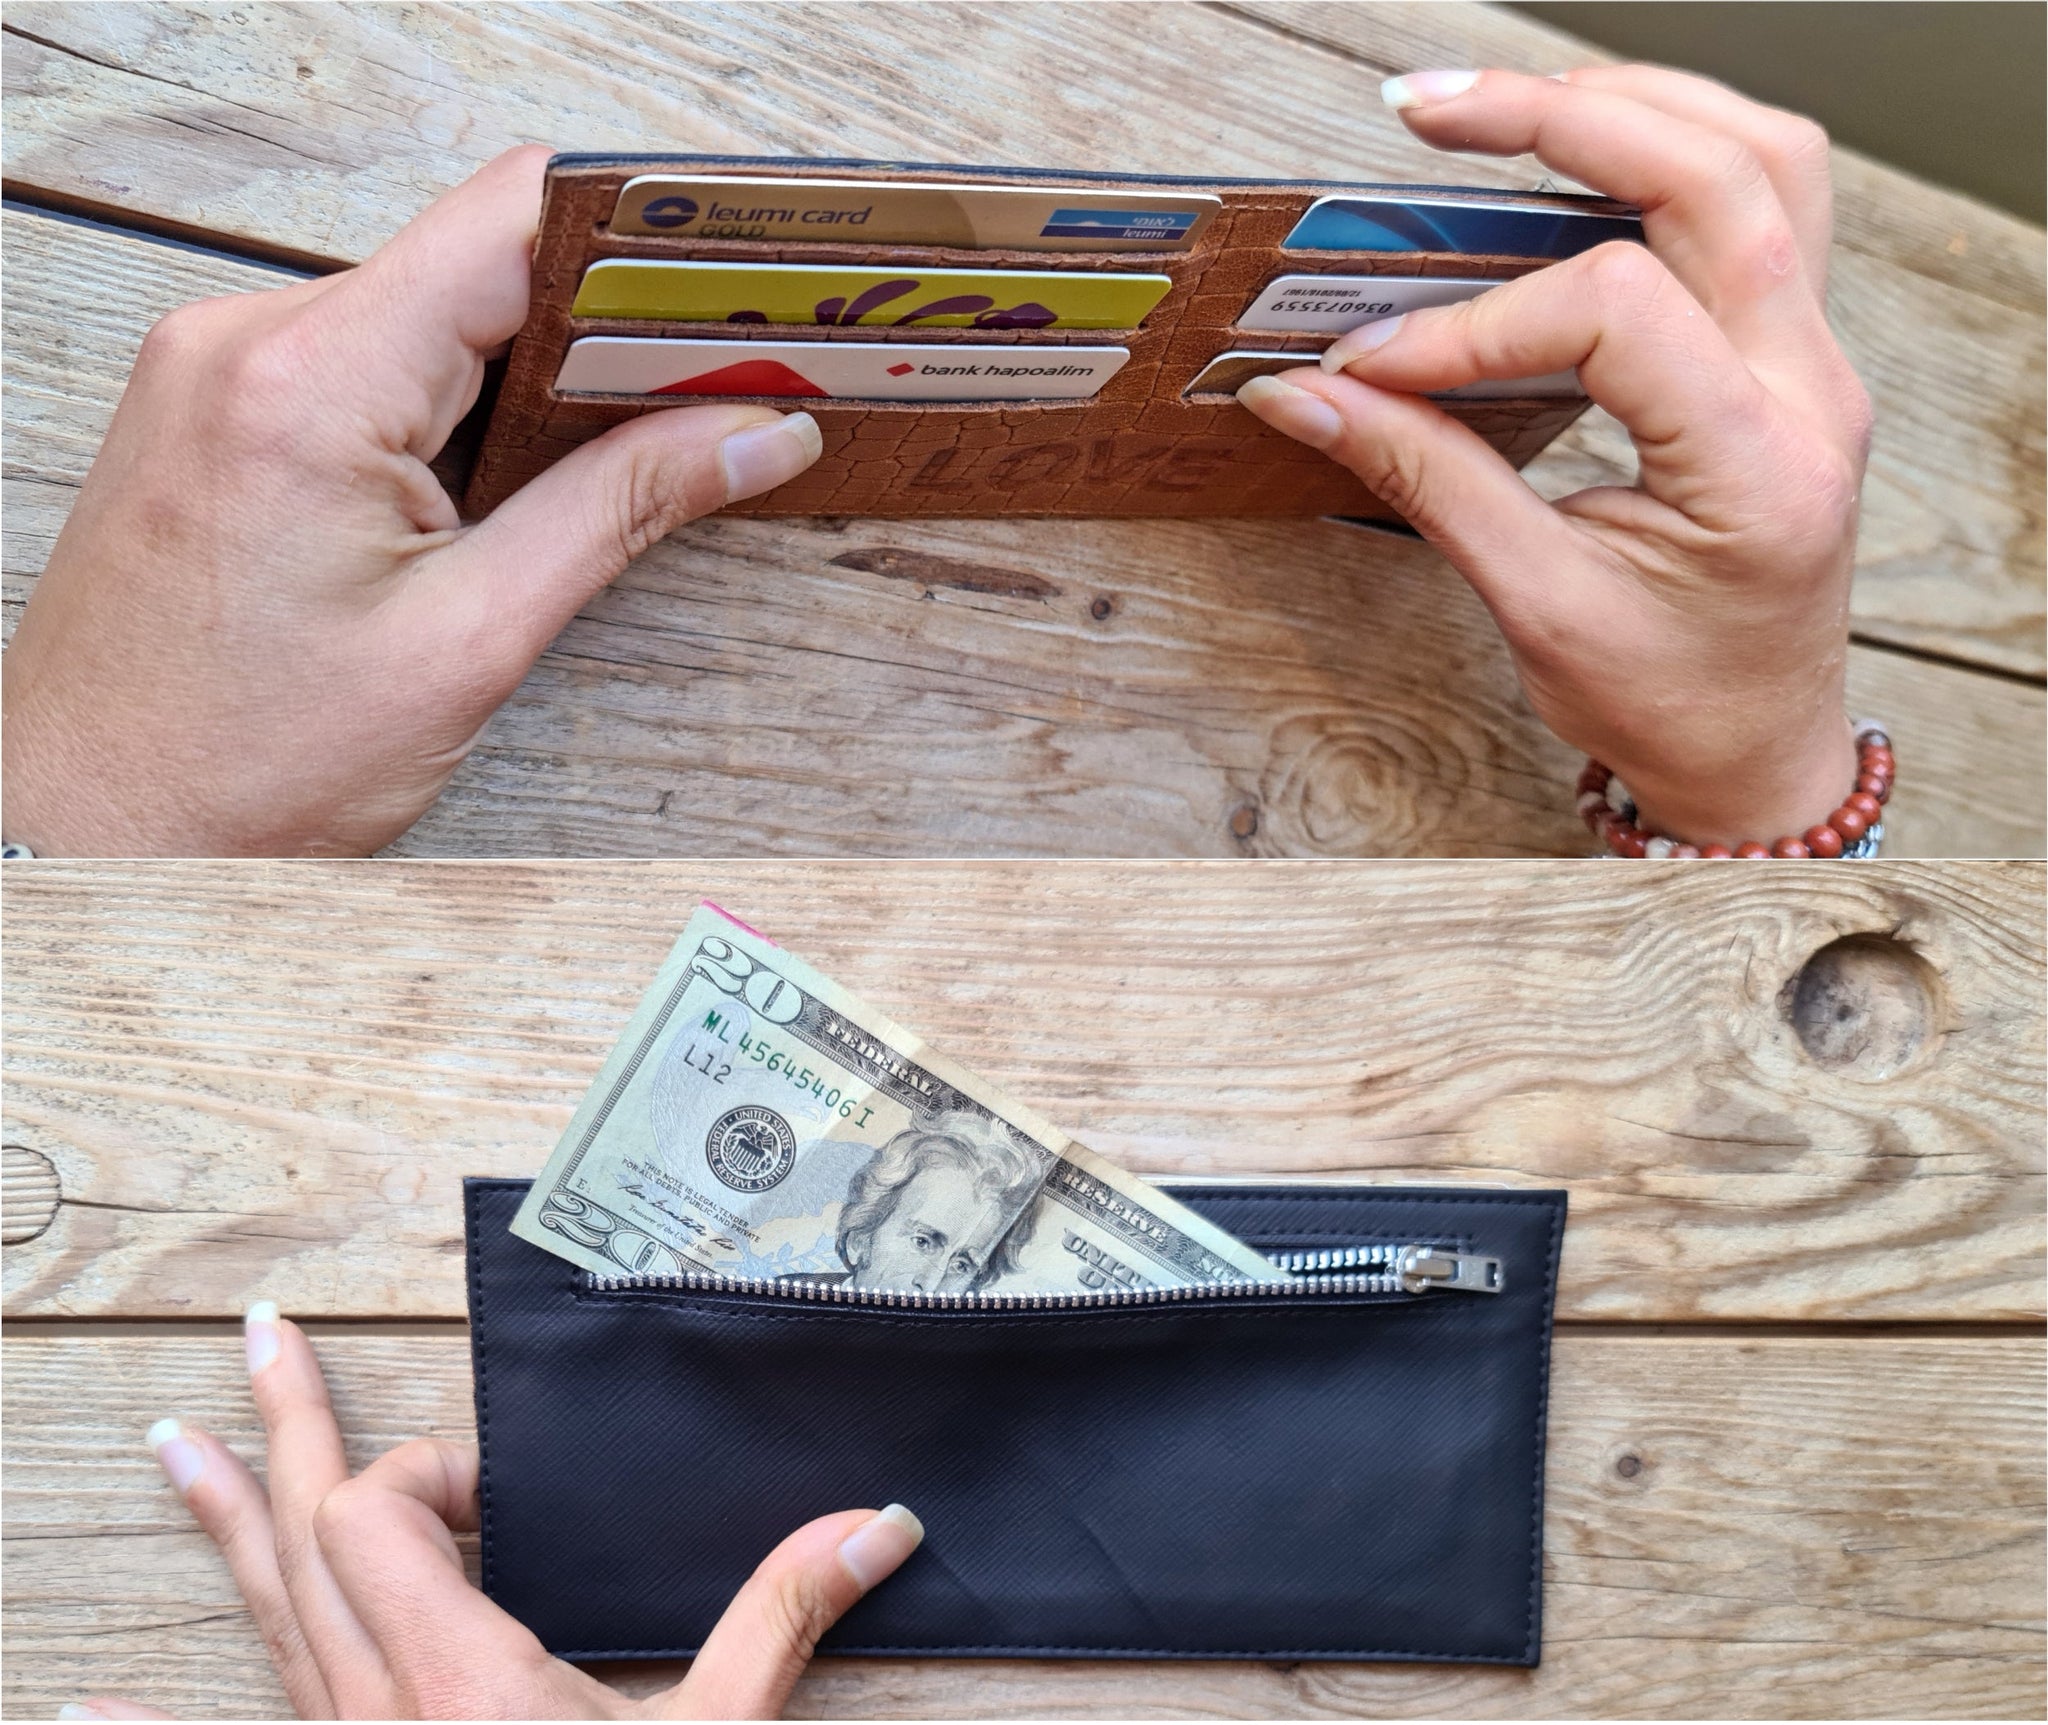 This slim and practical brown leather wallet is designed to be added to your favorite bag or purse without adding unnecessary bulk to your look. Features 6 card slots for up to 18 cards, a zip pocket for cash, and a minimalist luxury design for everyday use & style. This magical accessory is the ideal gift for any occasion.